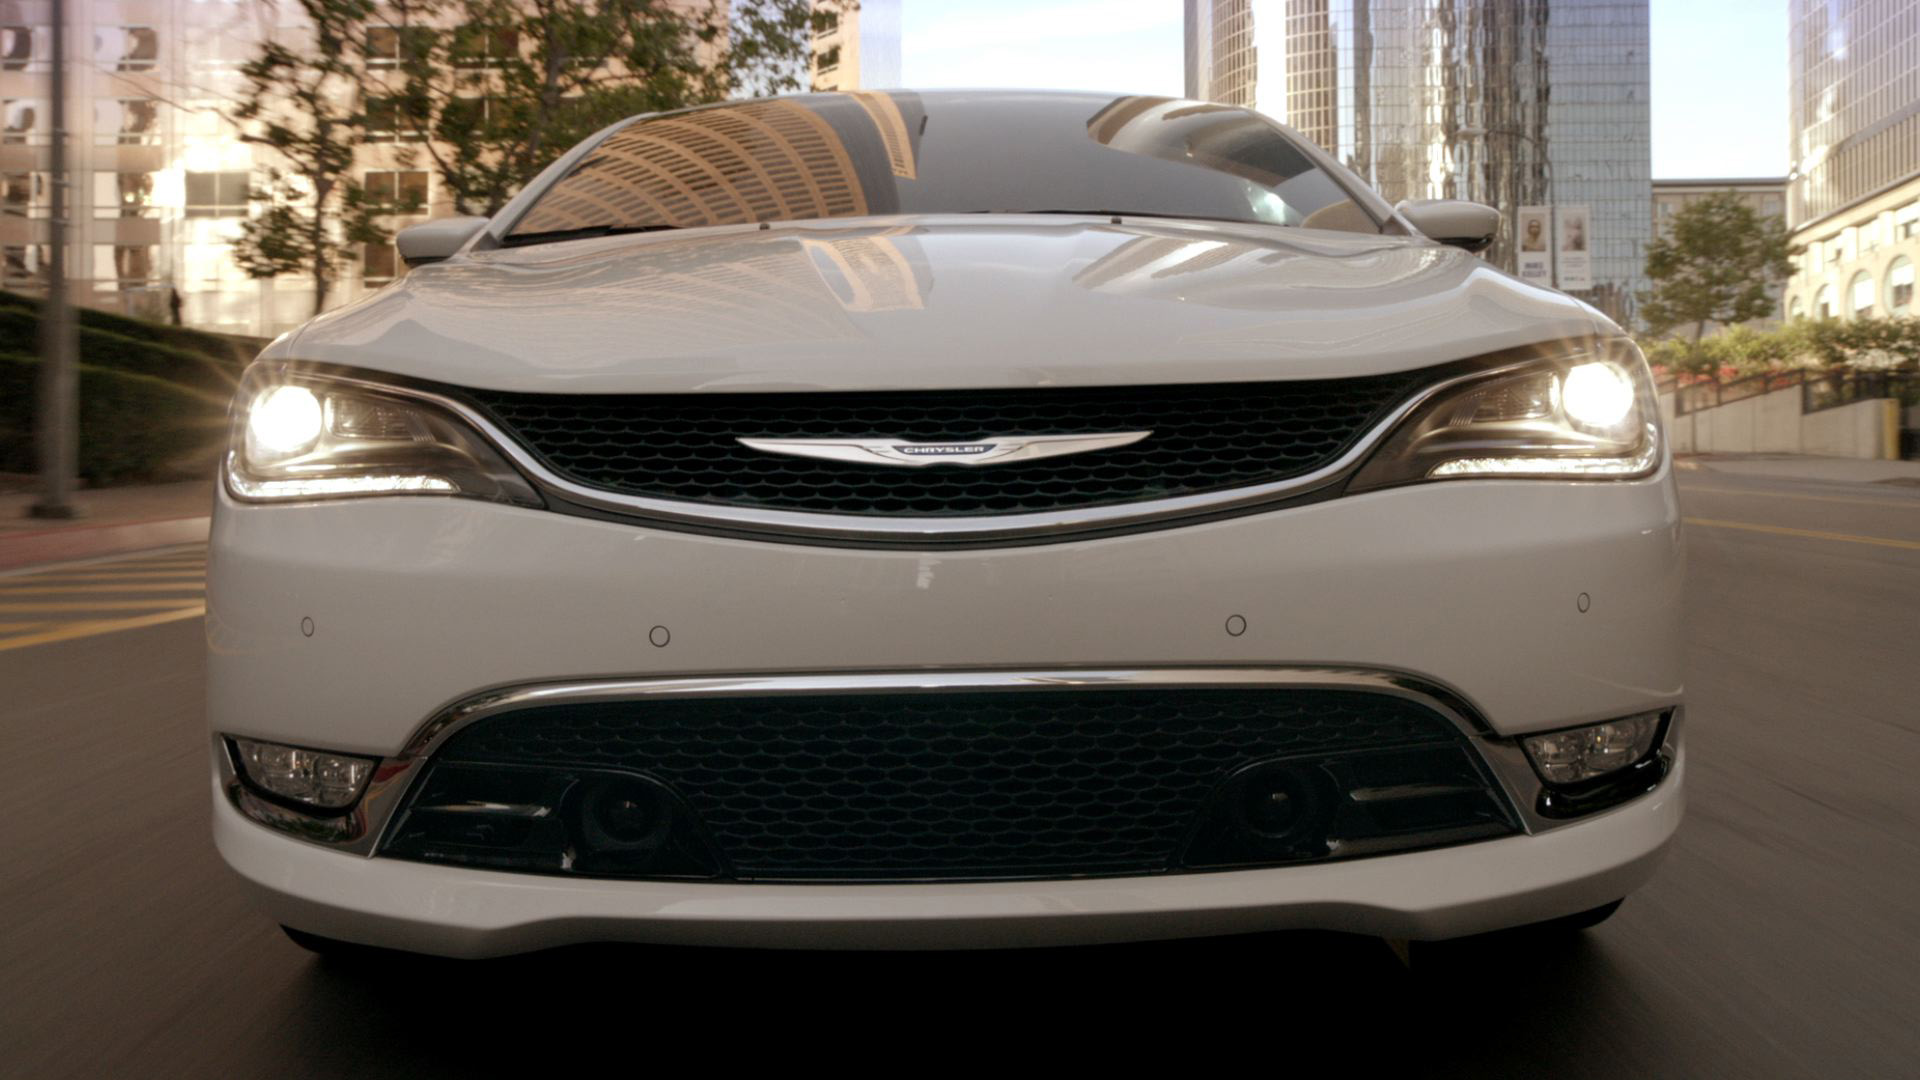 Chrysler Finally Makes A Car The Star, In Ads For New 200